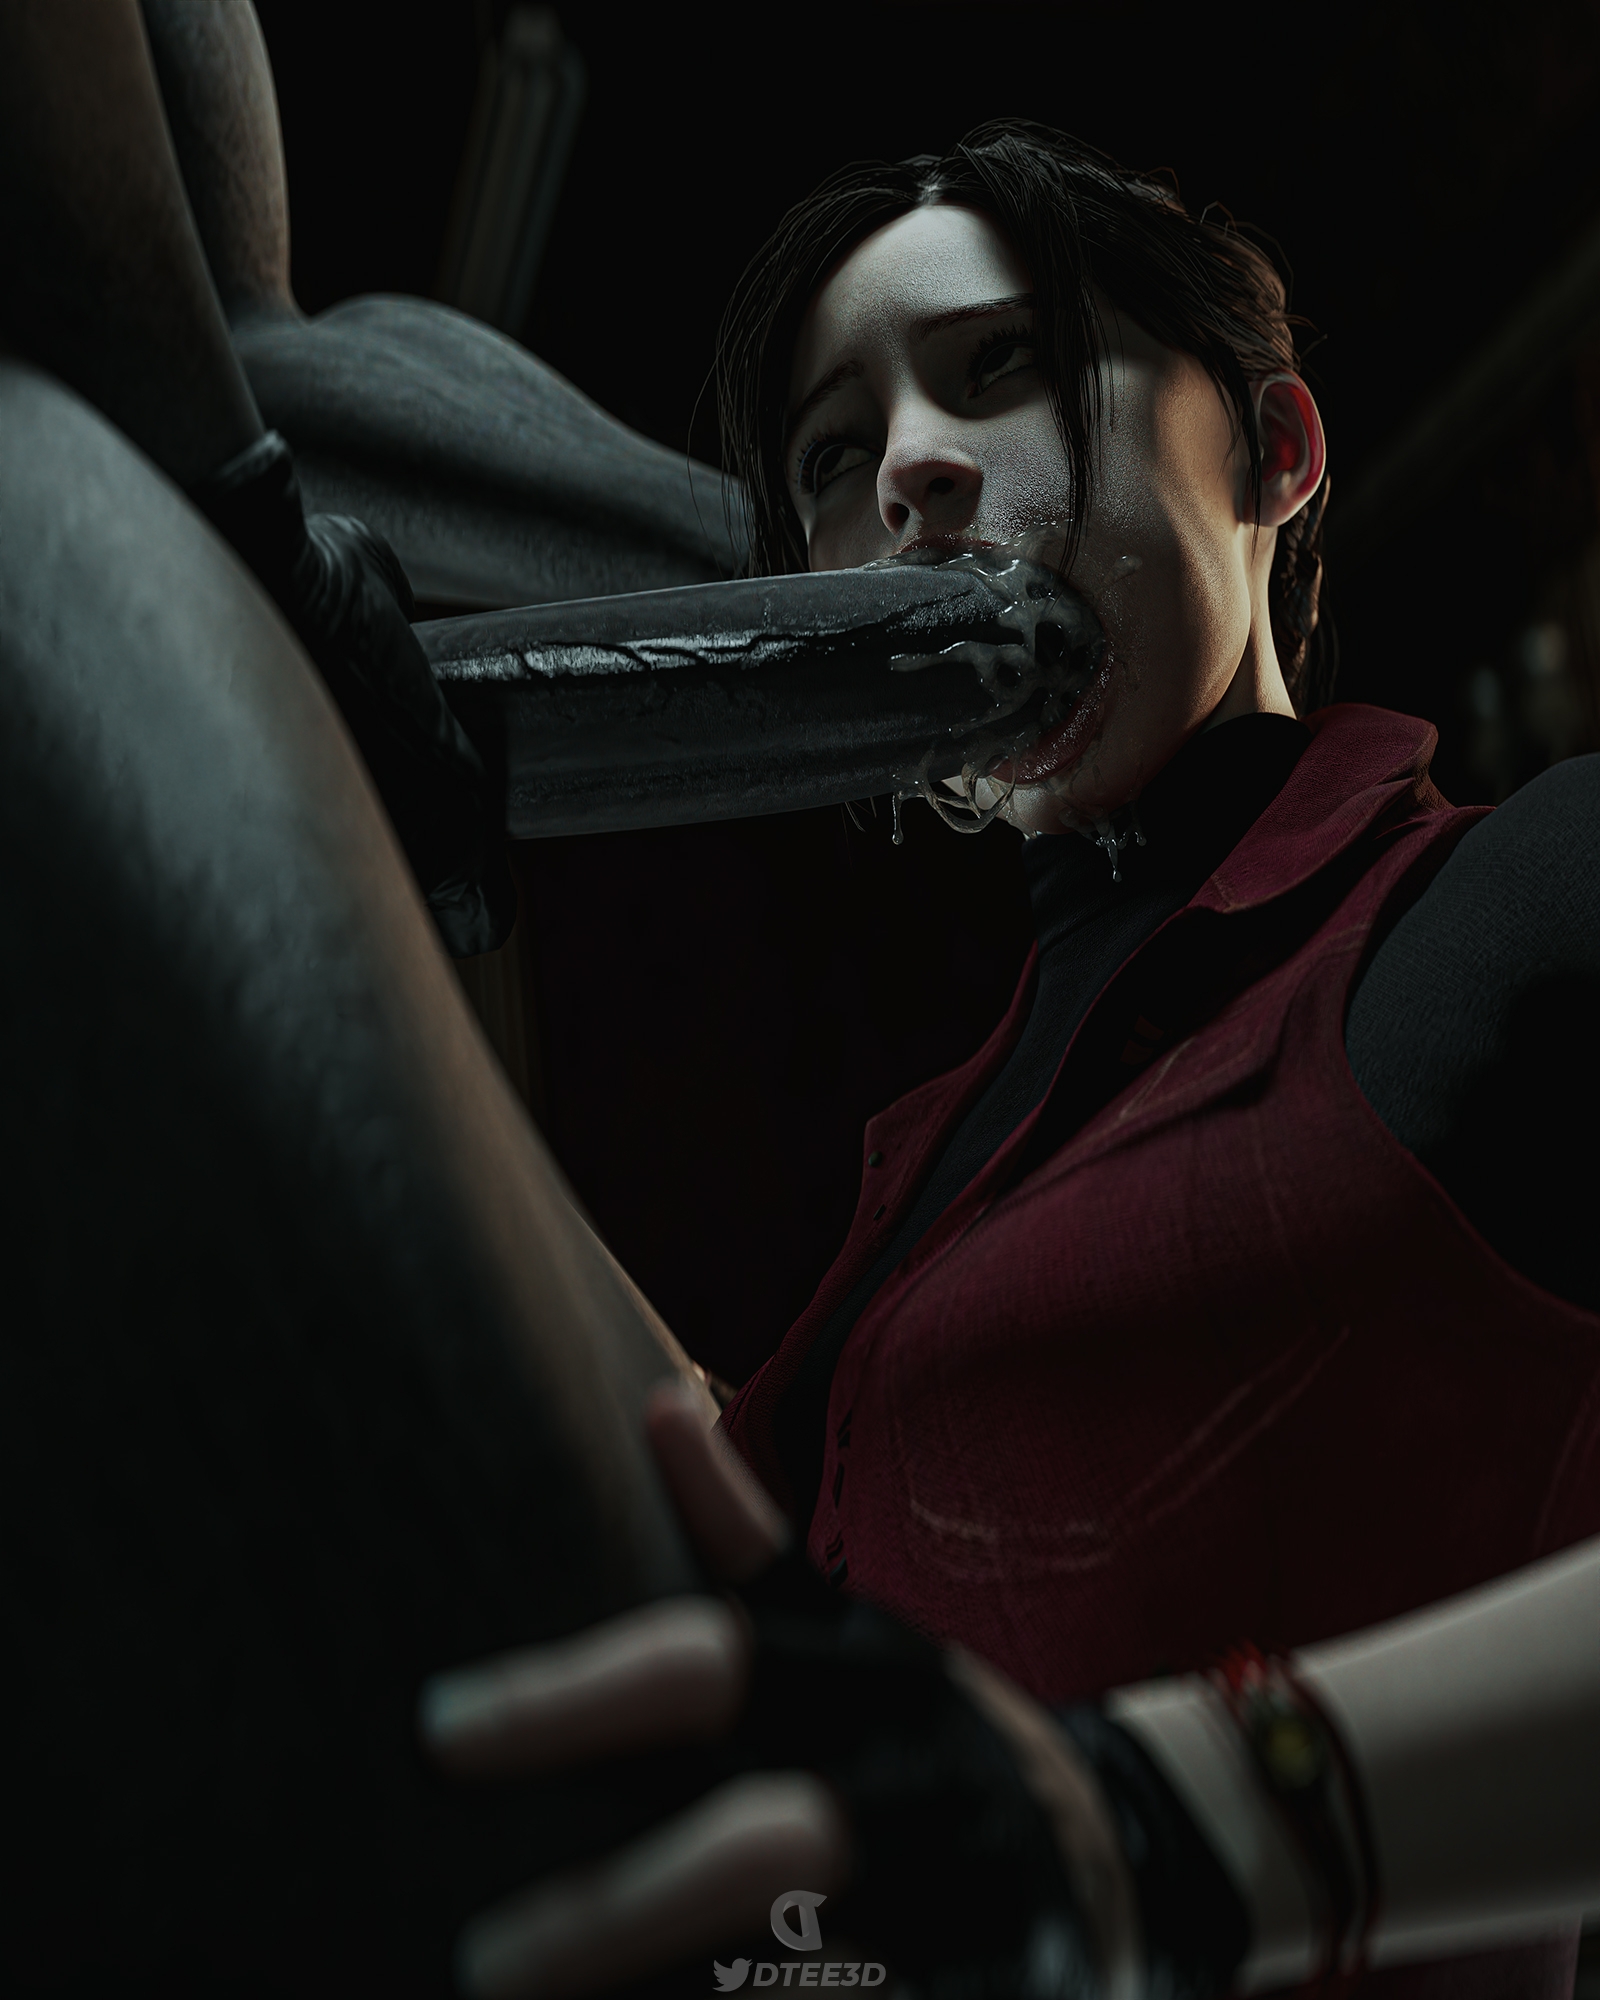 Mr. Sex x Claire Resident Evil Resident Evil 2 Remake Claire Redfield Mr X Creampie Blowjob Poster Render 2